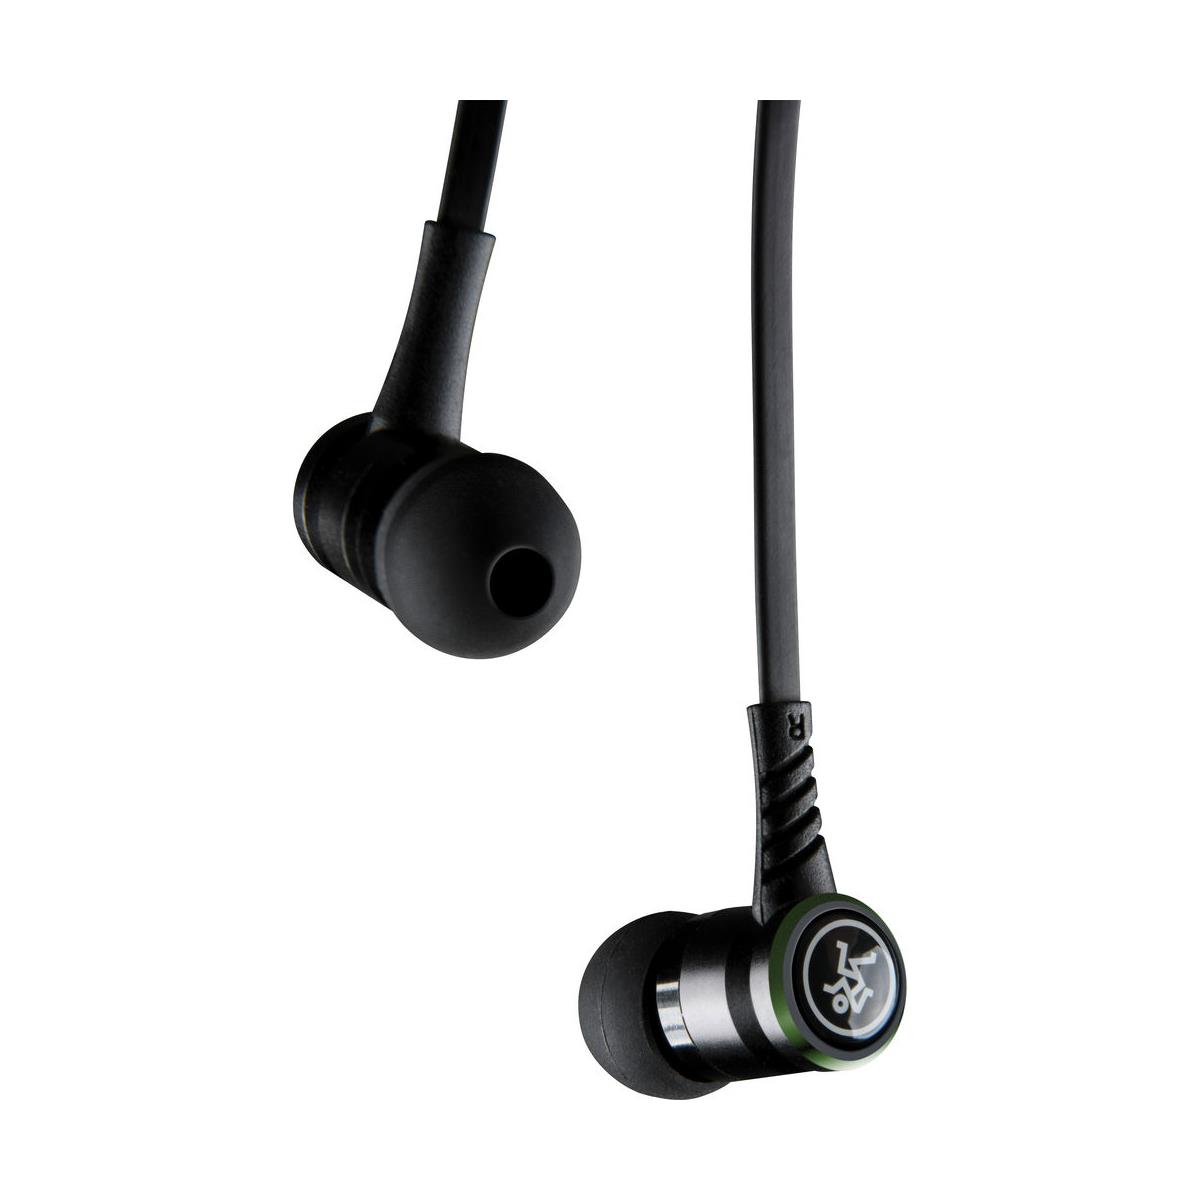 Image of Mackie CR-Buds Single Dynamic Driver High Performance Earphones with Mic/Control